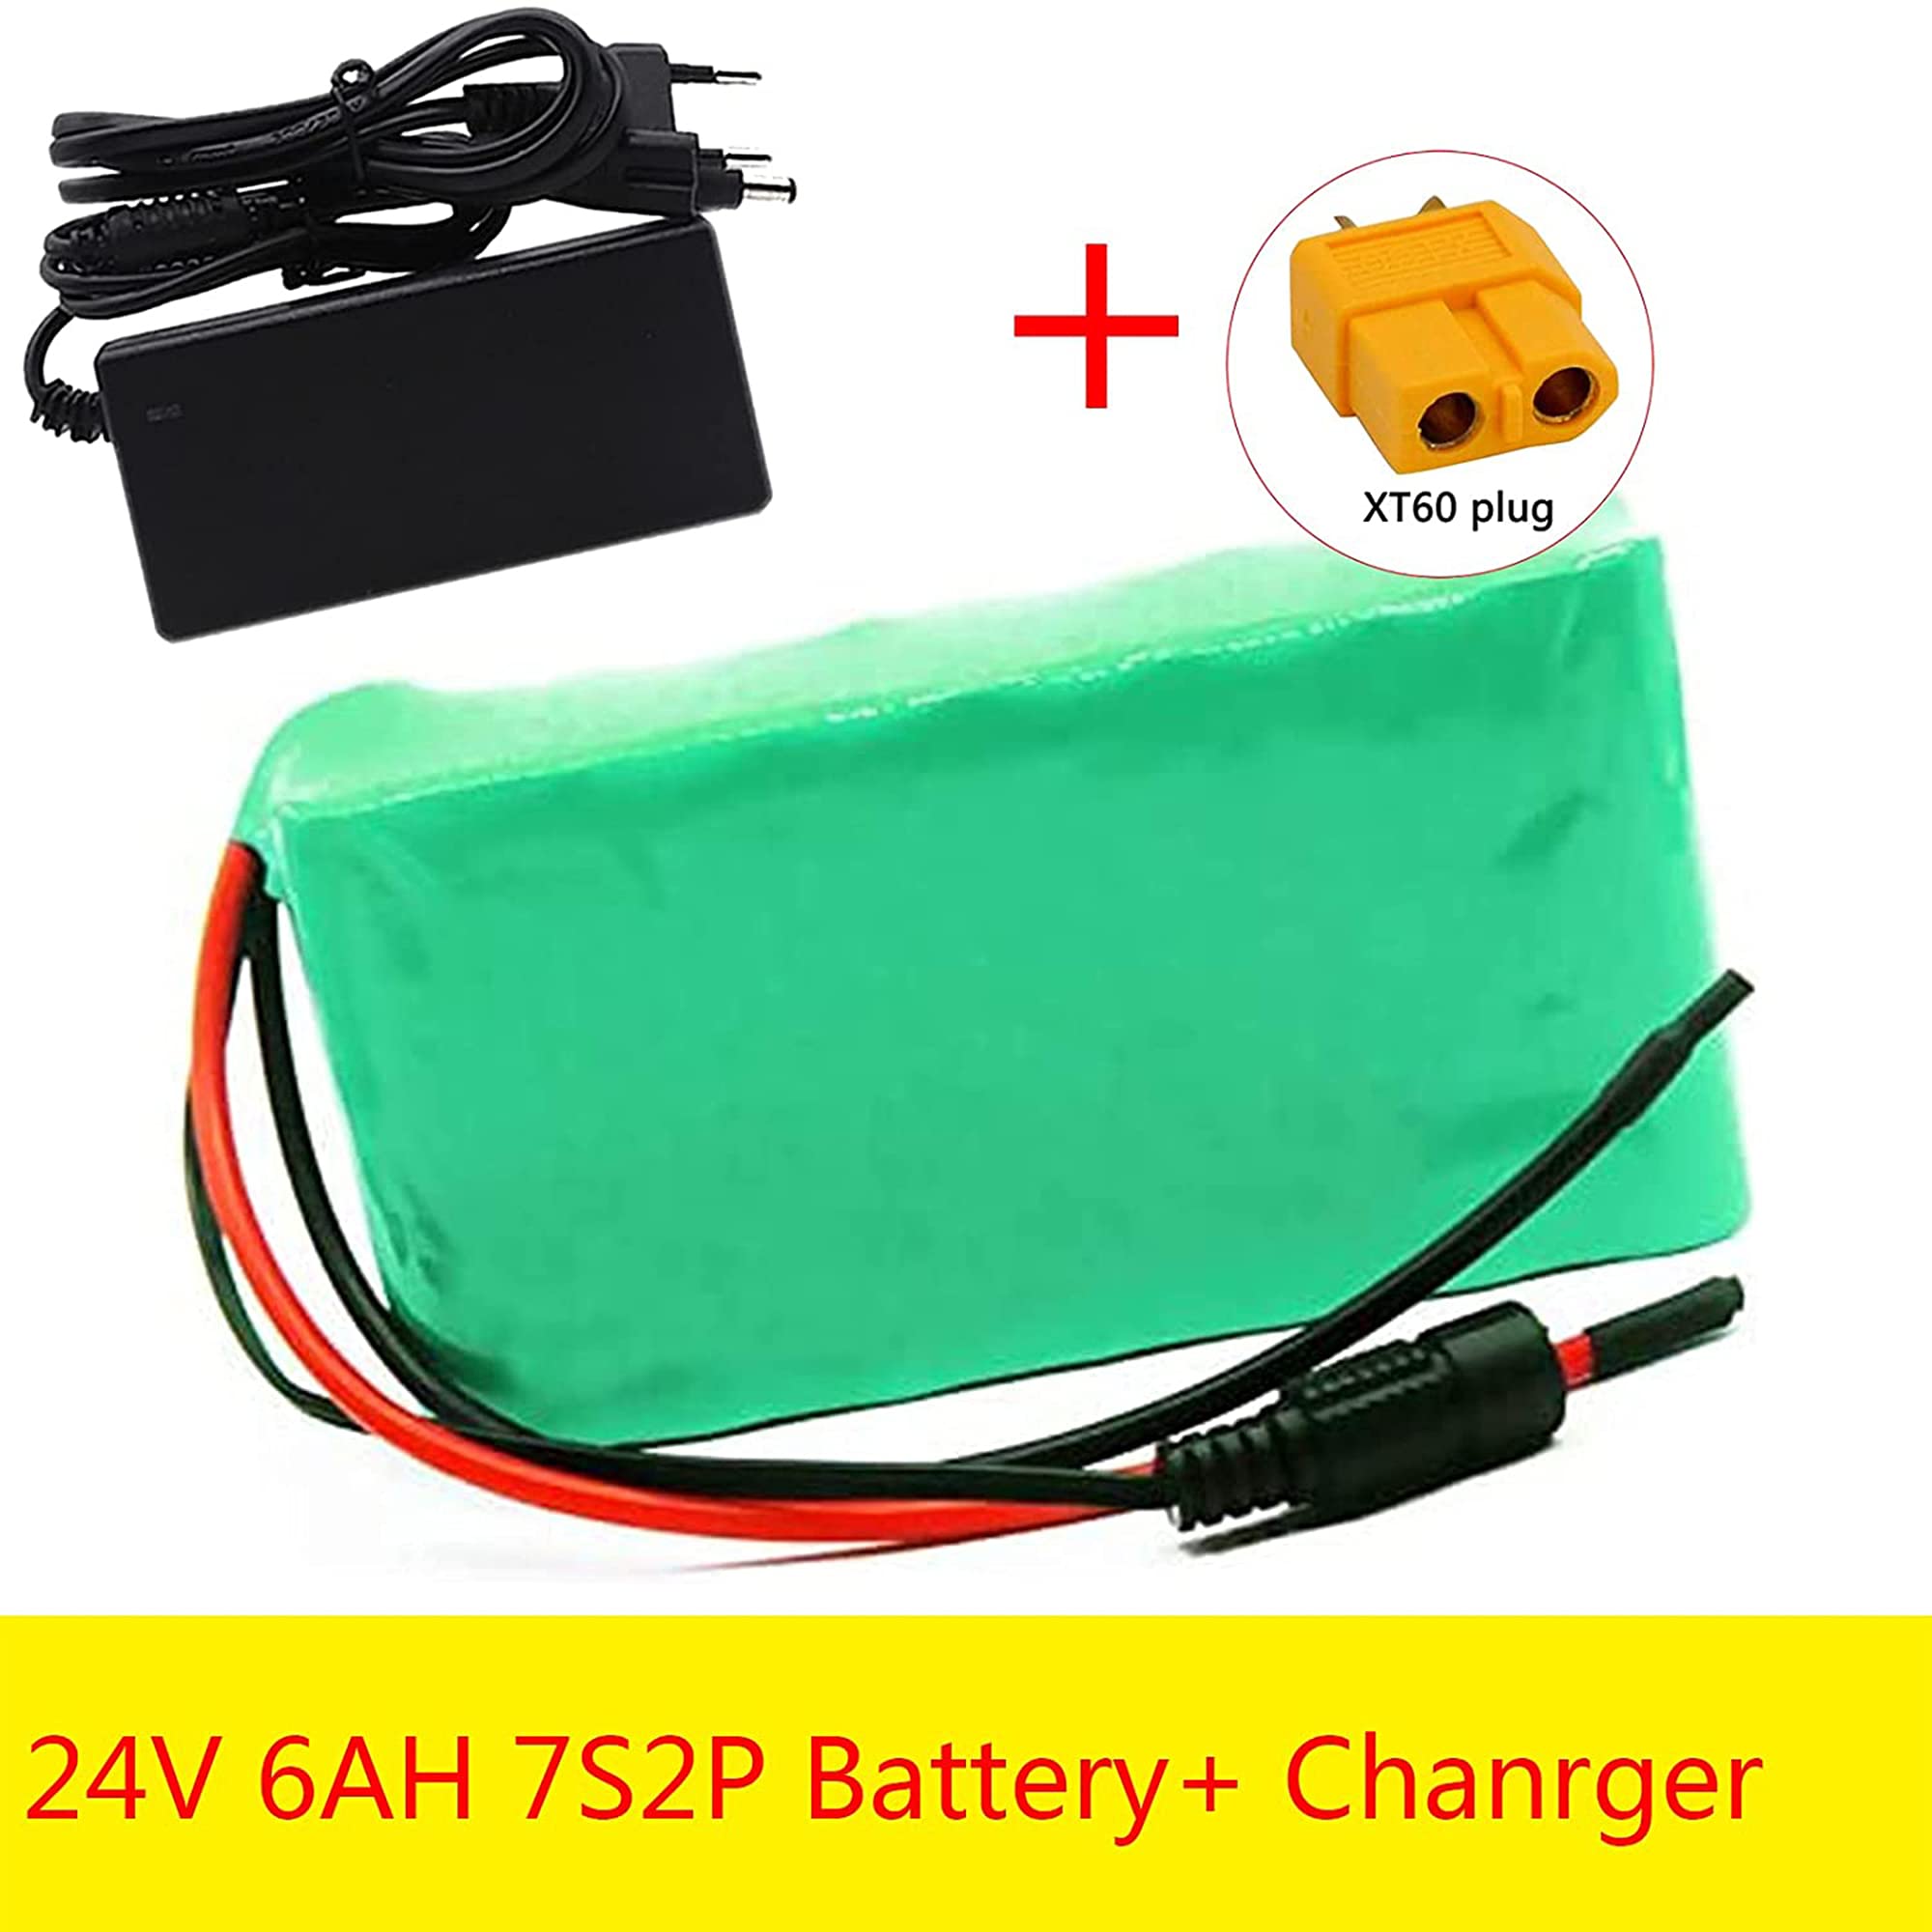 TGHY 24V 6Ah E-Bike Lithium Battery Pack with BMS and Charger 6000mAh Li-ion Battery for Mobility Scooter Electric Go-Kart Kids Ride On Car Electric Wheelchair,Xt60